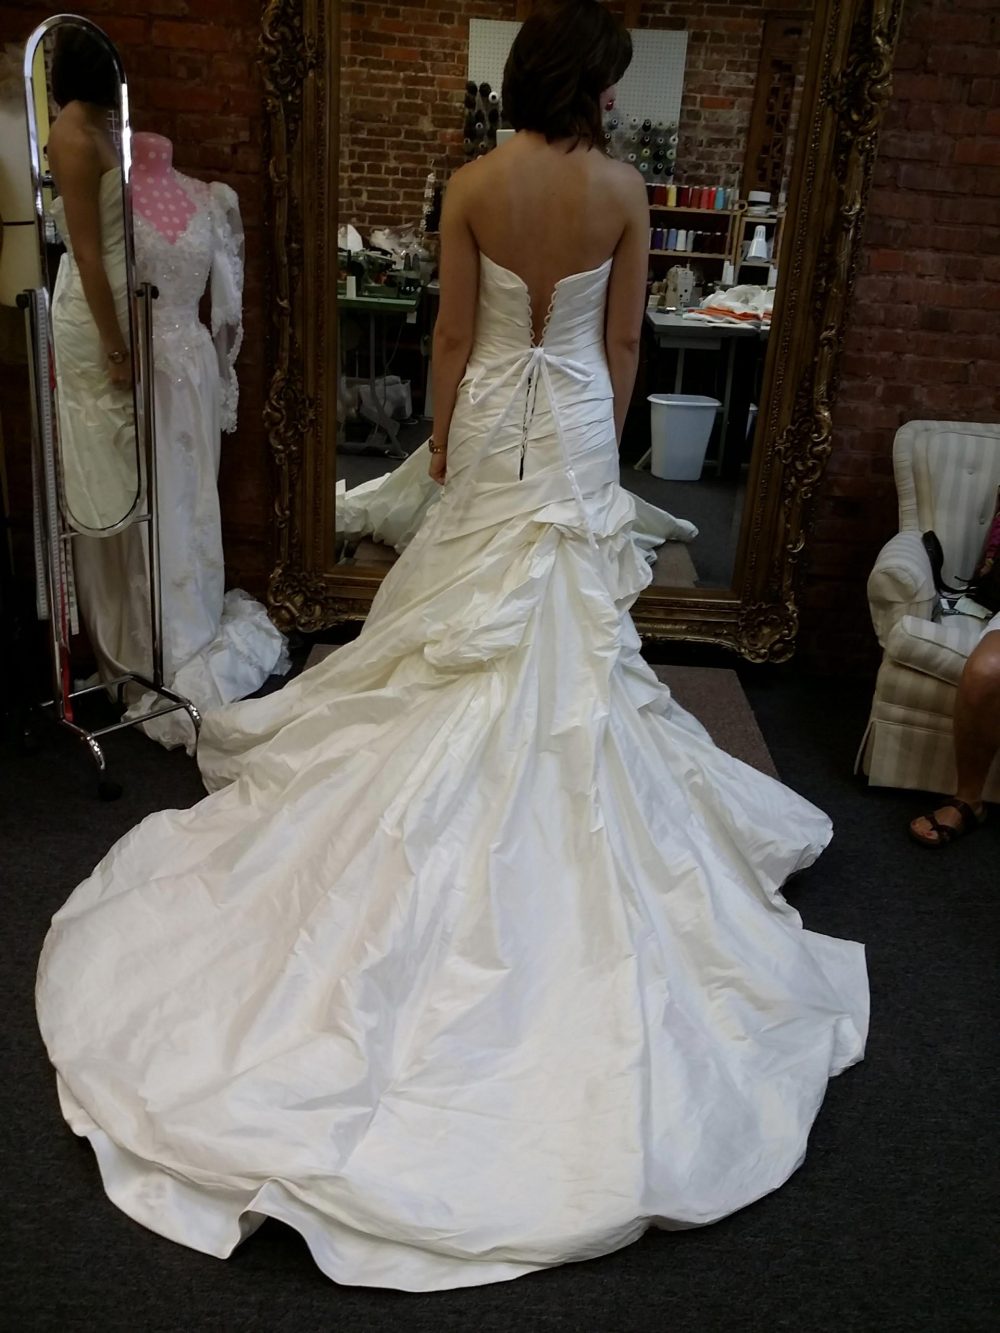 Alterations to back side of gown